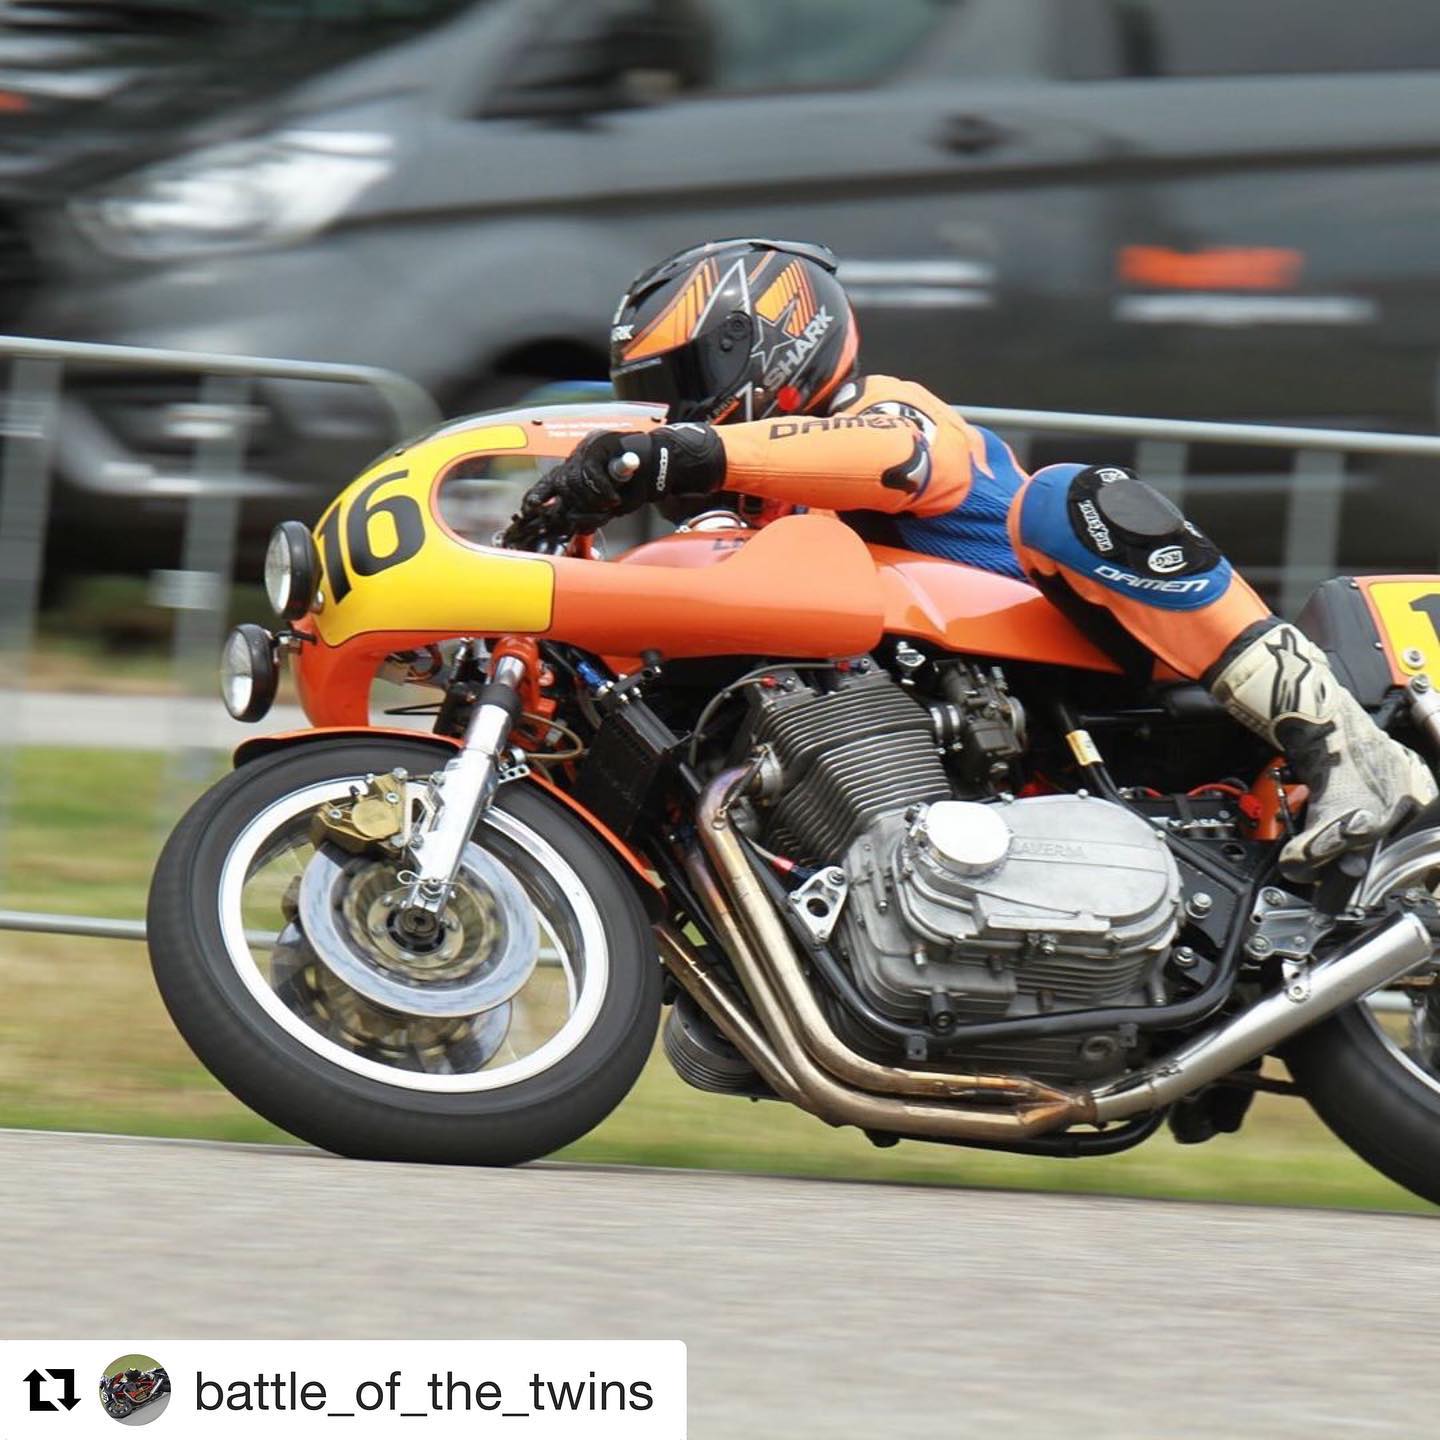 My Friend Peter at Oss  @battle_of_the_twins with @get_repost
・・・
So much fun.